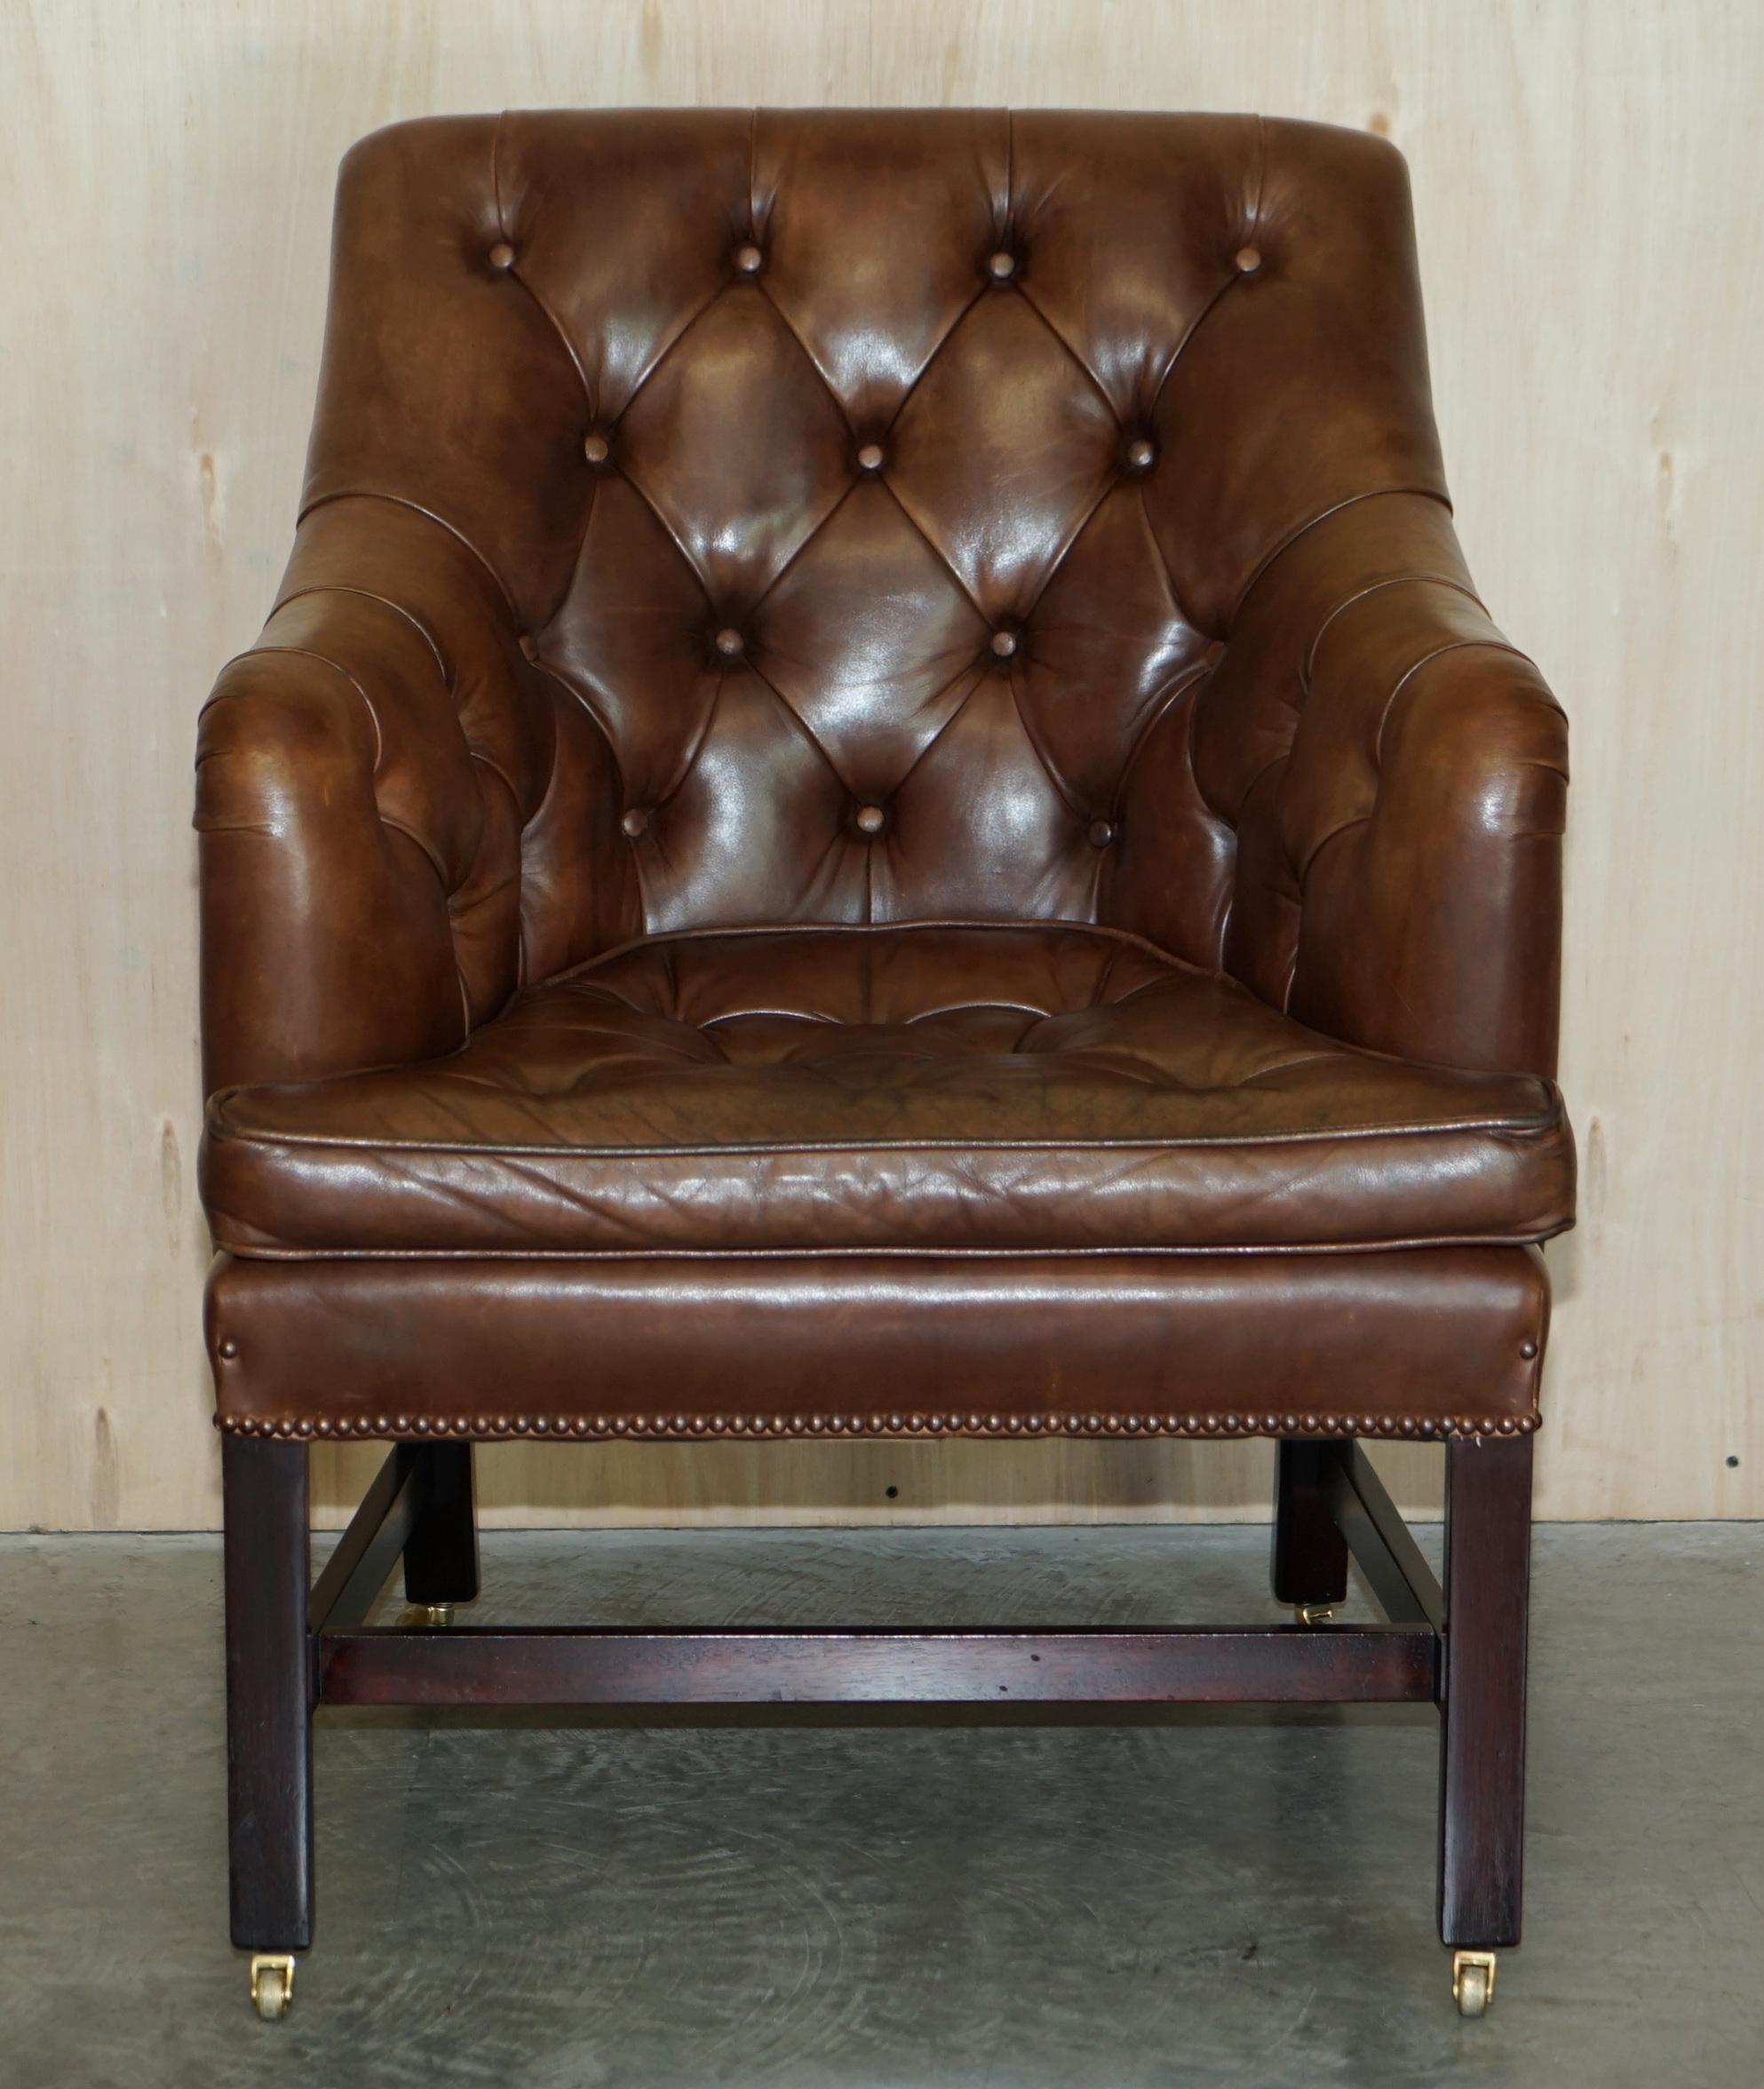 We are delighted to offer for sale this stunning George Smith cigar brown Georgian style occasional or desk armchair RRP £5,200

A true masterpiece of an armchair, this chair looks sublime in any setting and has very agreeable dimensions for those